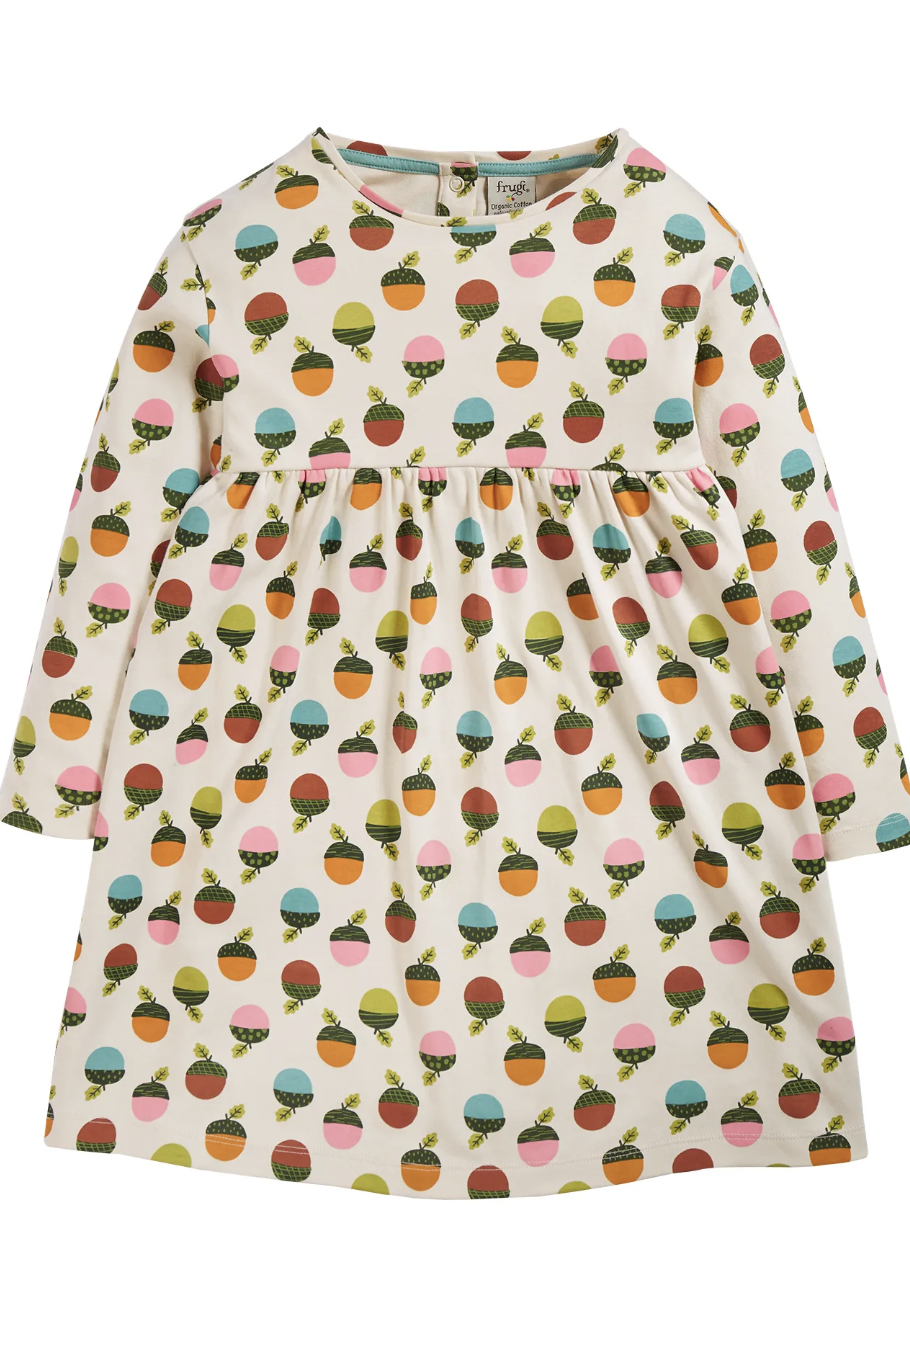 Frugi Amelia Dress in Autumn Acorns-Kids-Ohh! By Gum - Shop Sustainable